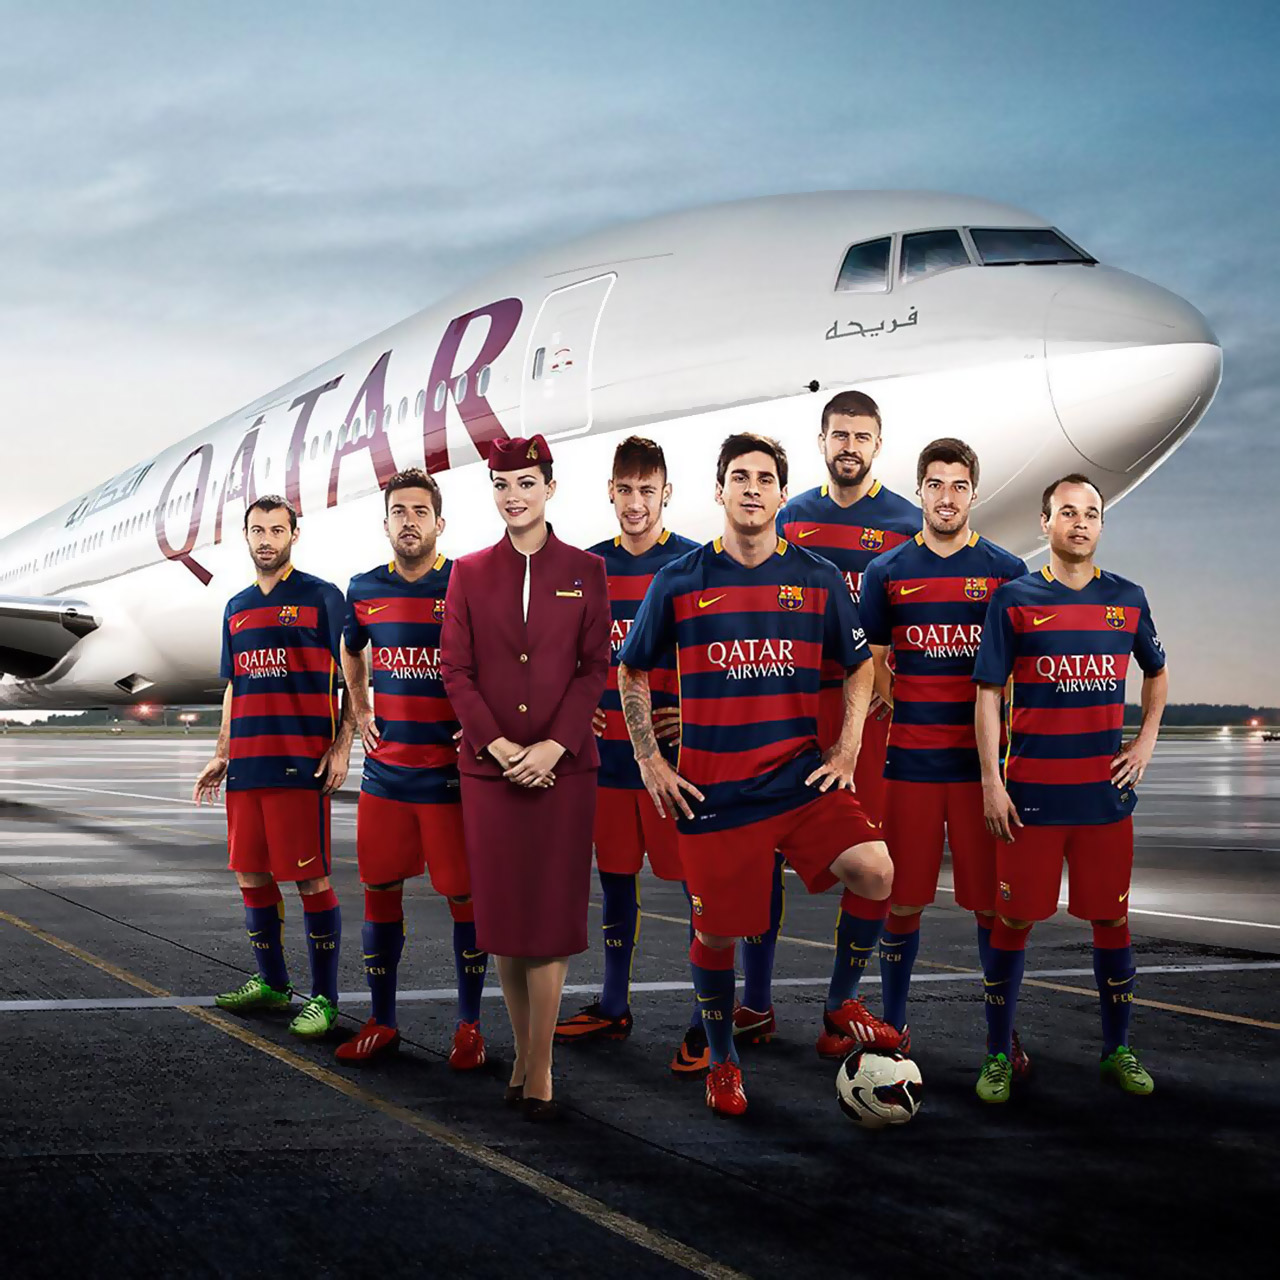 Lionel Messi and FC Barcelona players pose with Qatar Airways jet